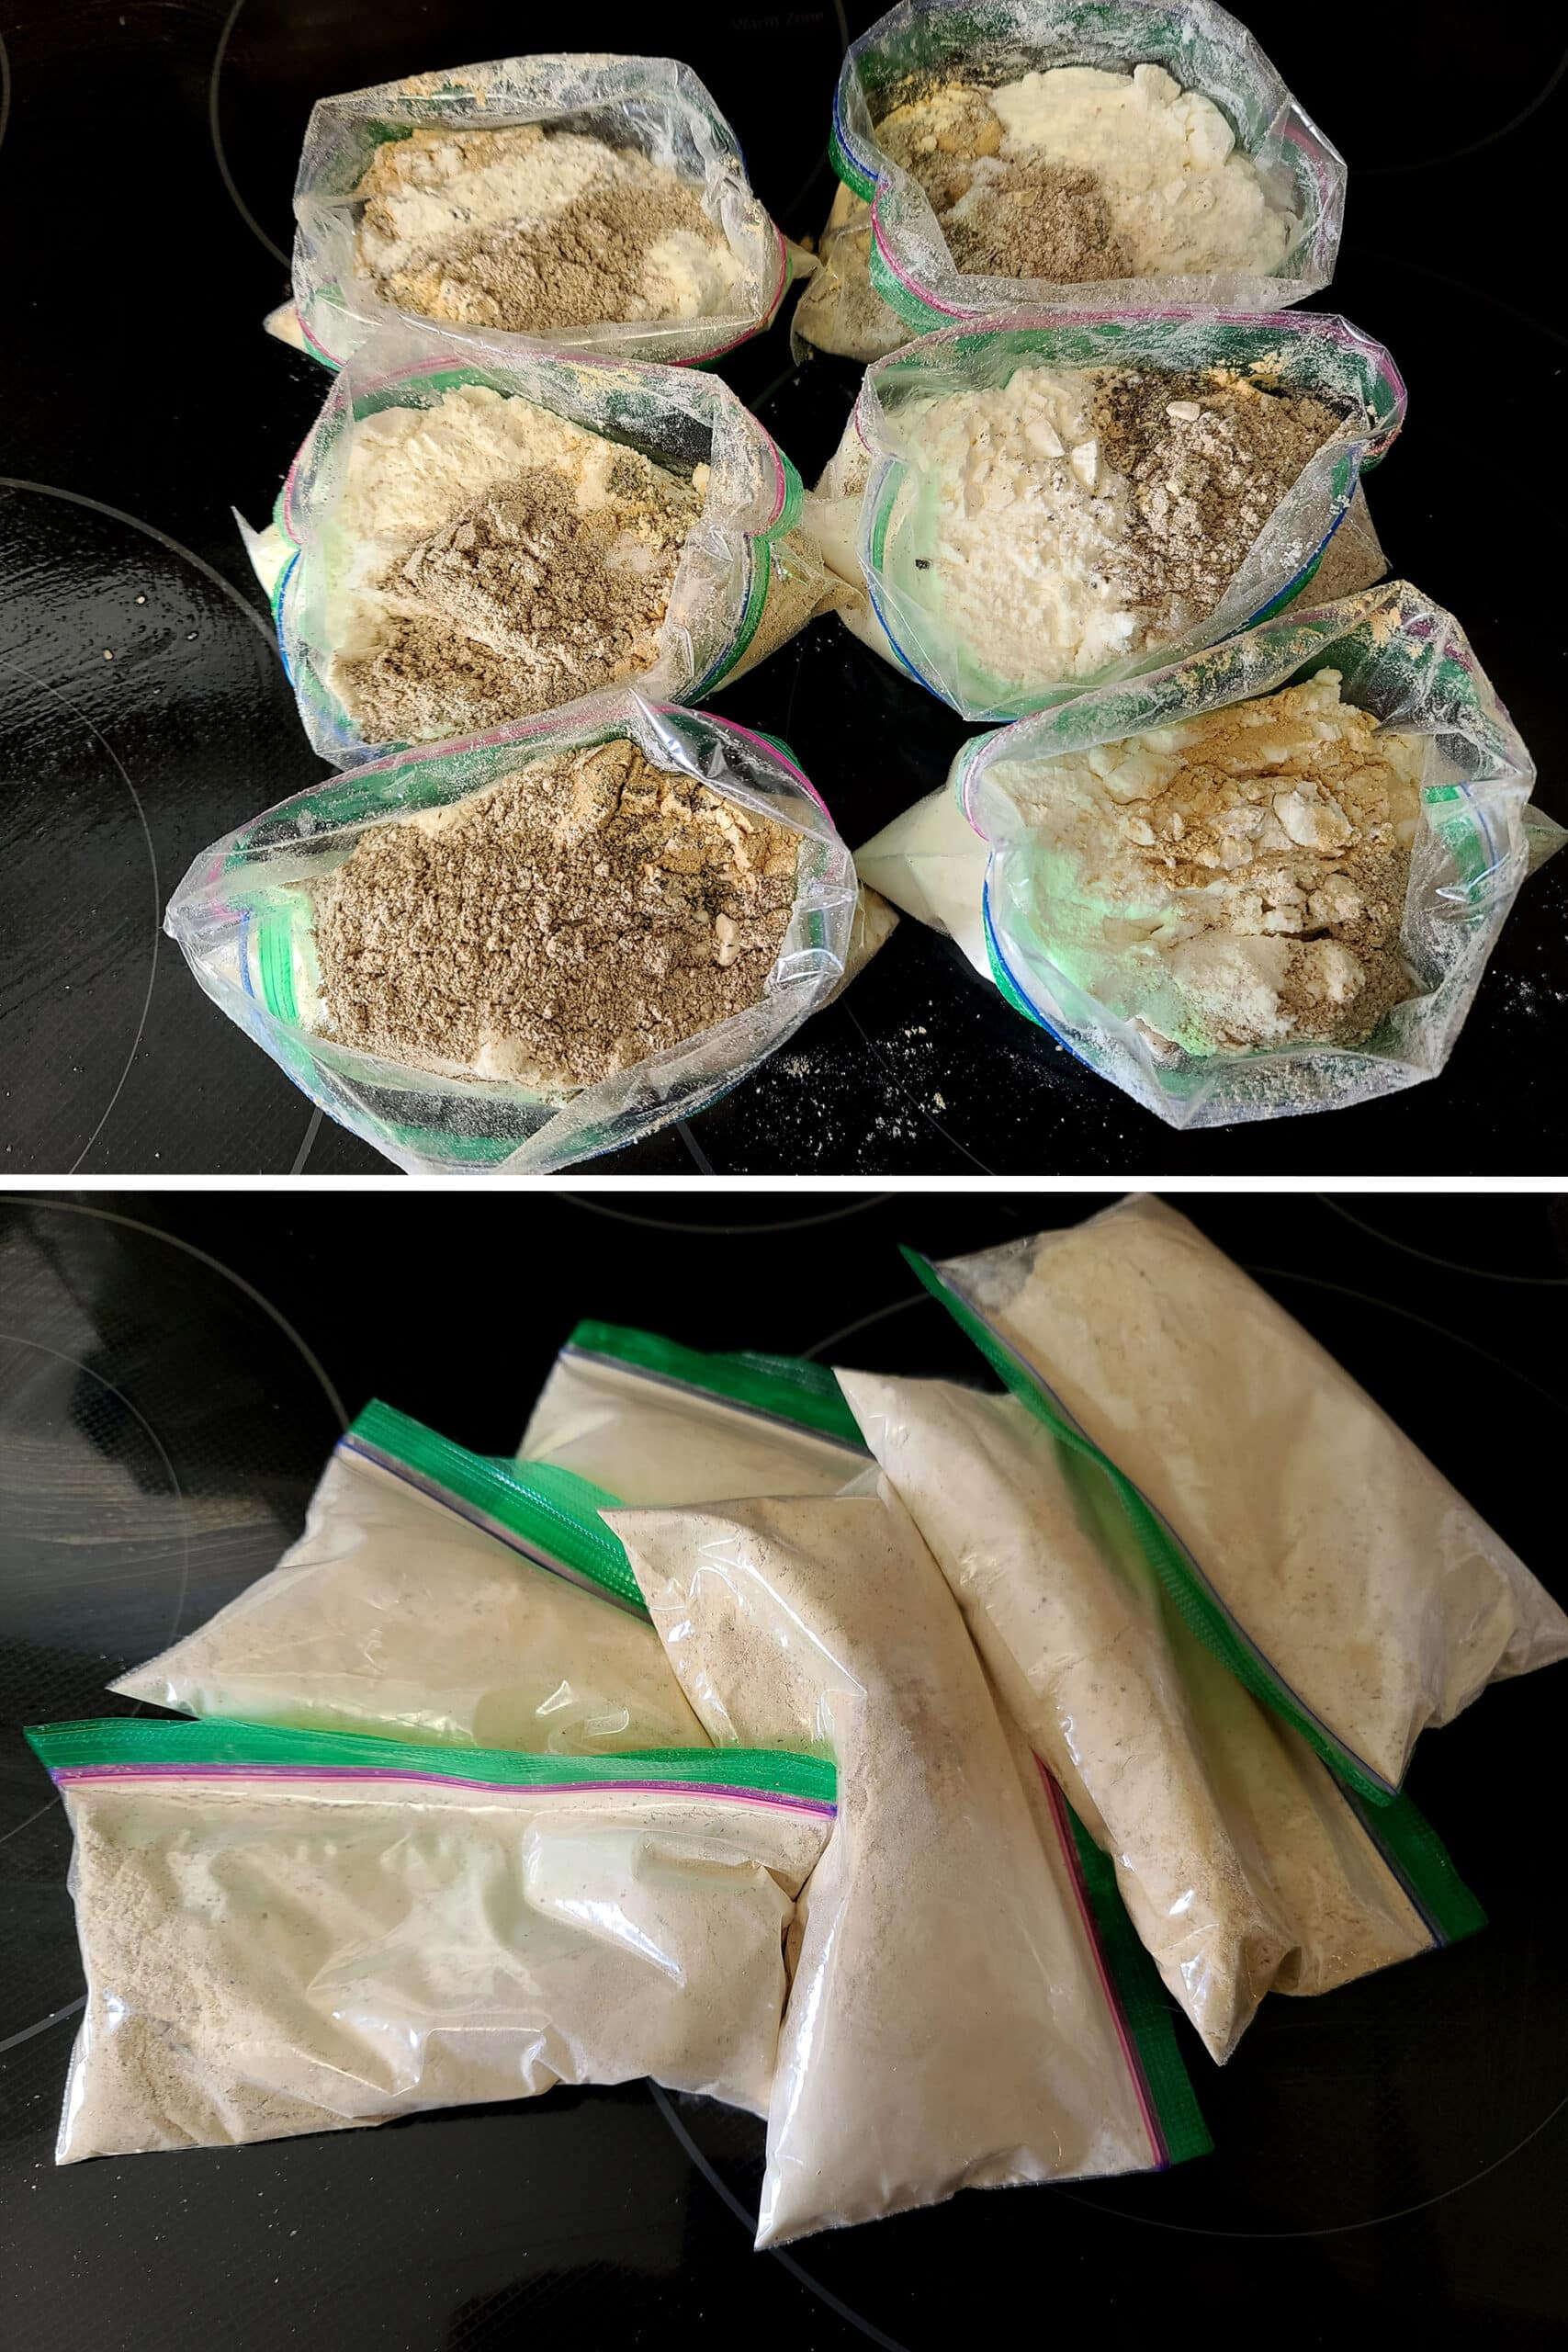 2 part image showing baggies with measured soup mix ingredients before and after being mixed and sealed.